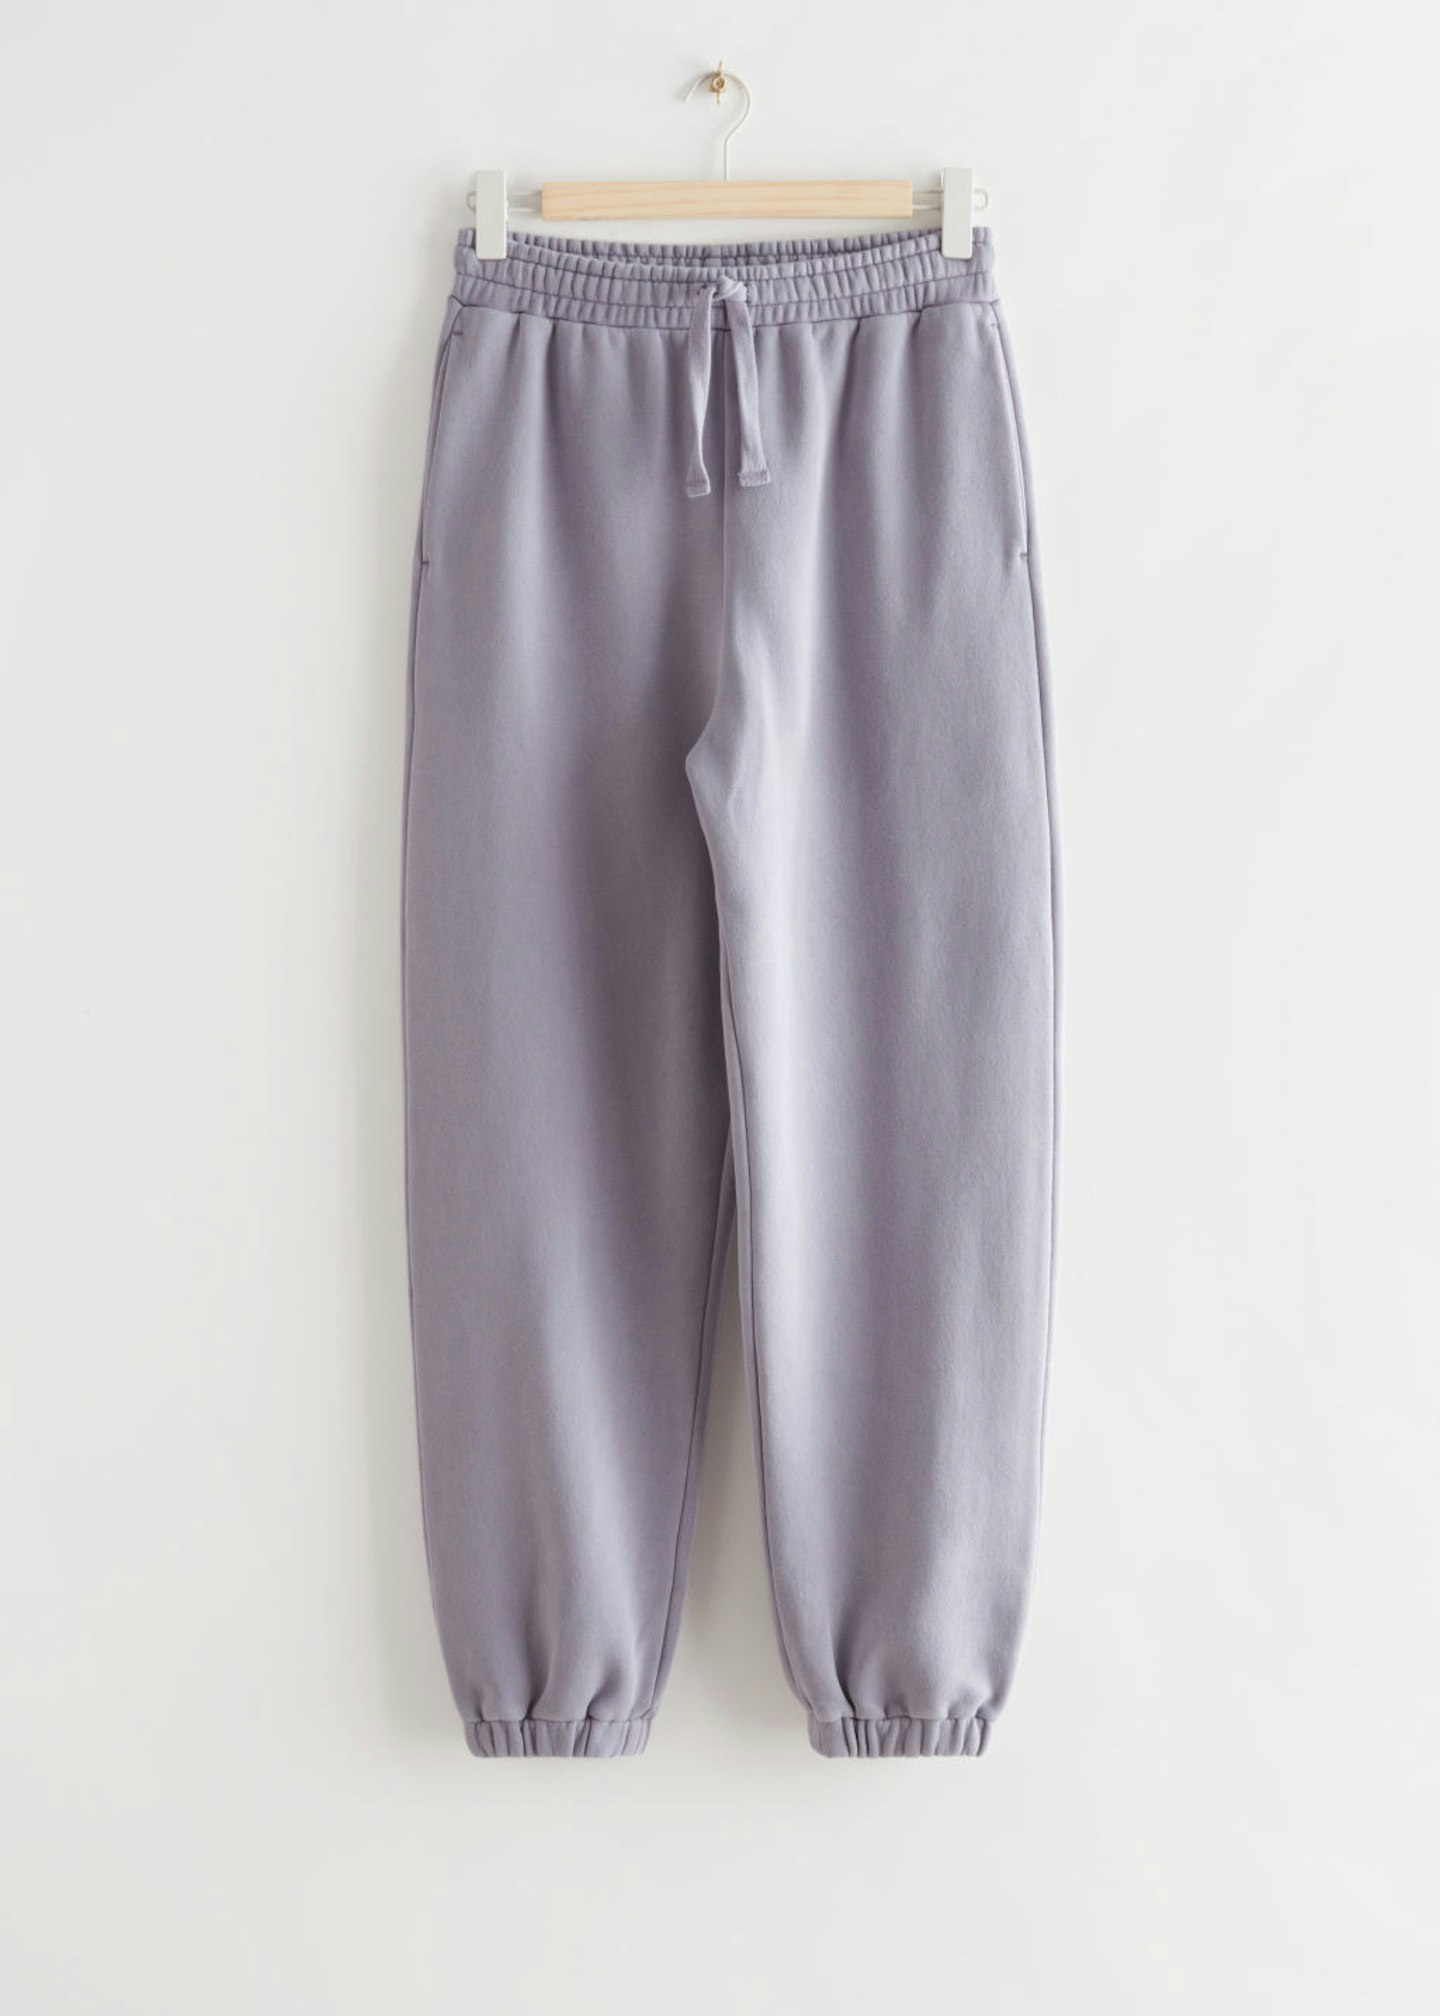 & Other Stories, Relaxed Drawstring Trousers, £55